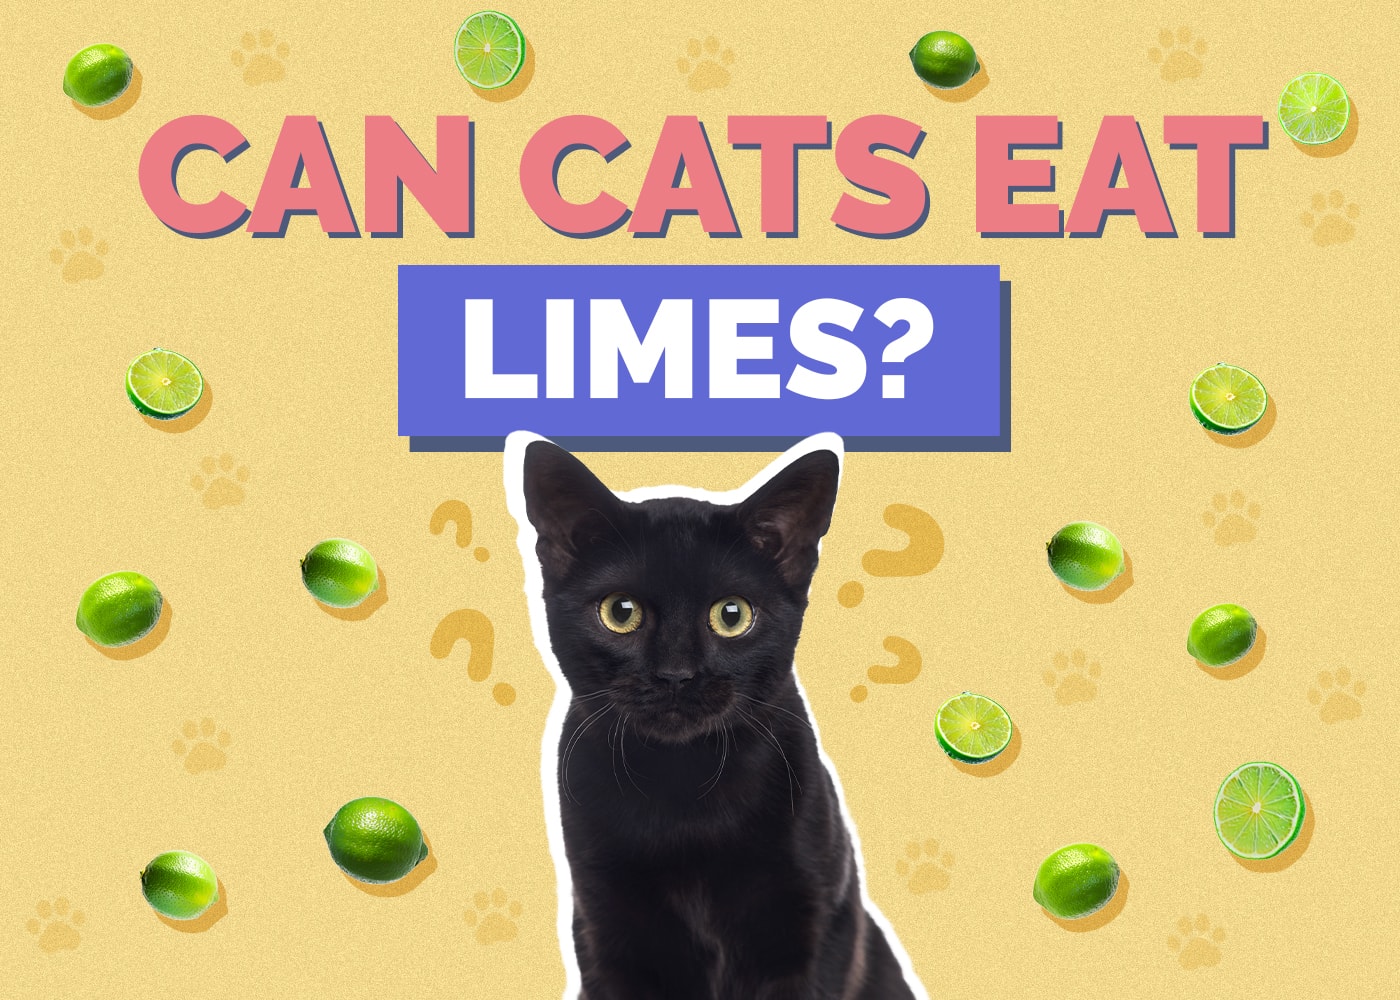 Can Cats Eat limes